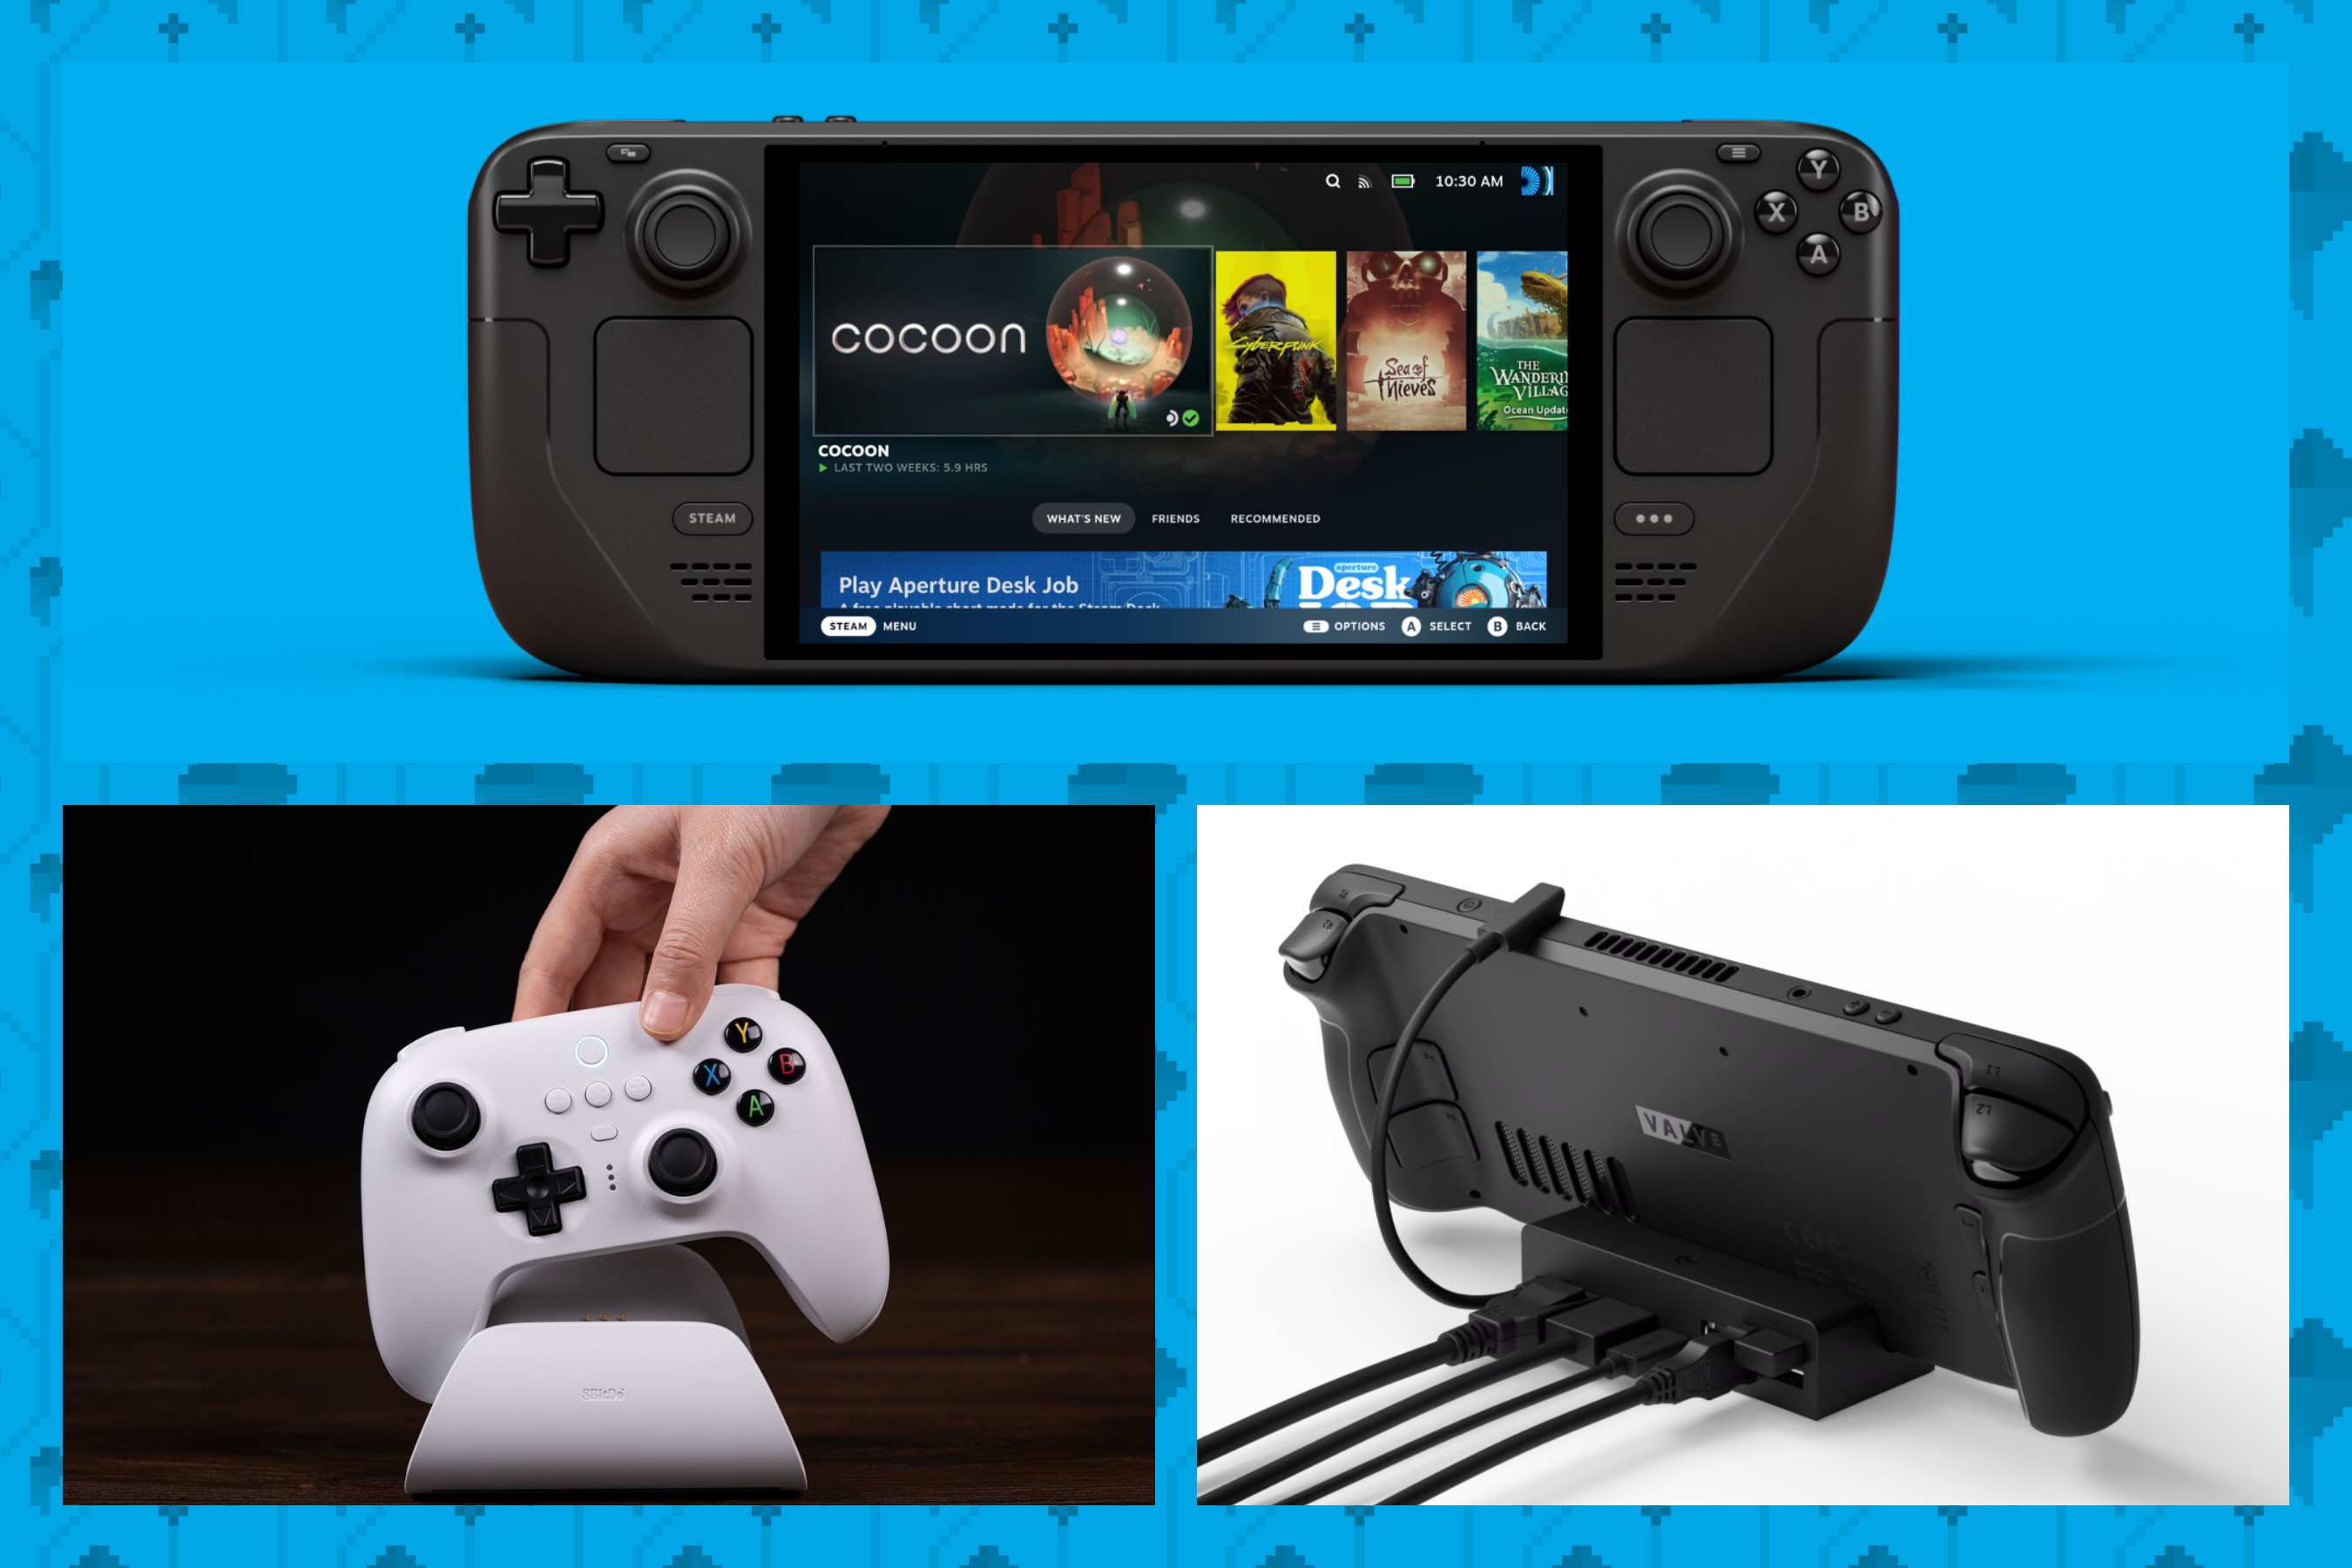 A graphic showing three individual images. On the top is Valve’s Steam Deck OLED handheld PC console. Two images on the bottom from left to right include the 8BitDo Ultimate Bluetooth controller and the Steam Deck Docking station to play the console on your TV or monitor.